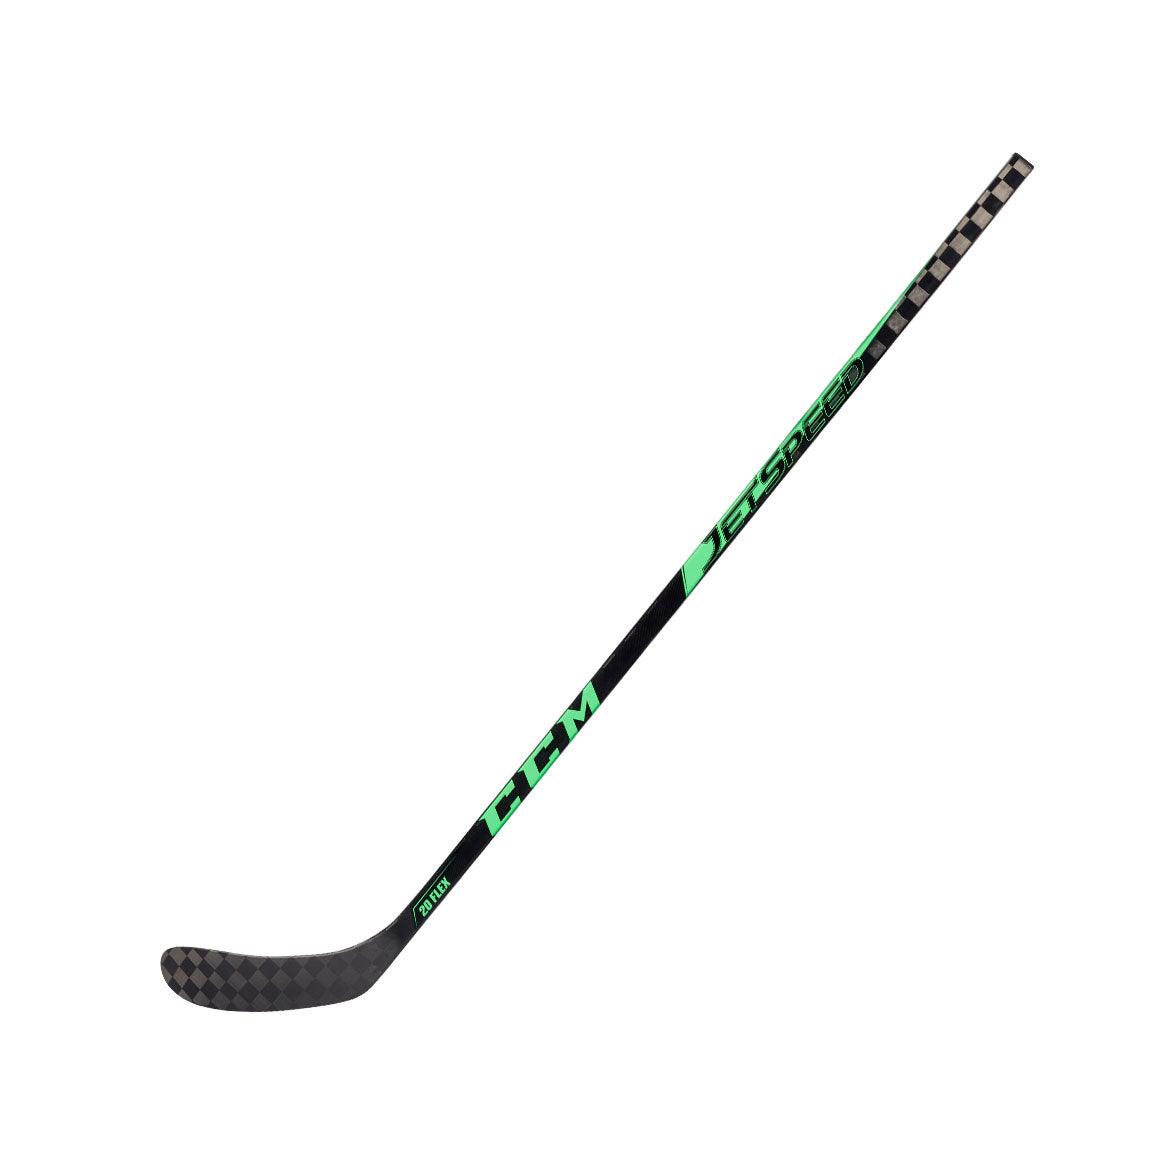 Jetspeed 20 Youth Hockey Stick - Youth - Sports Excellence